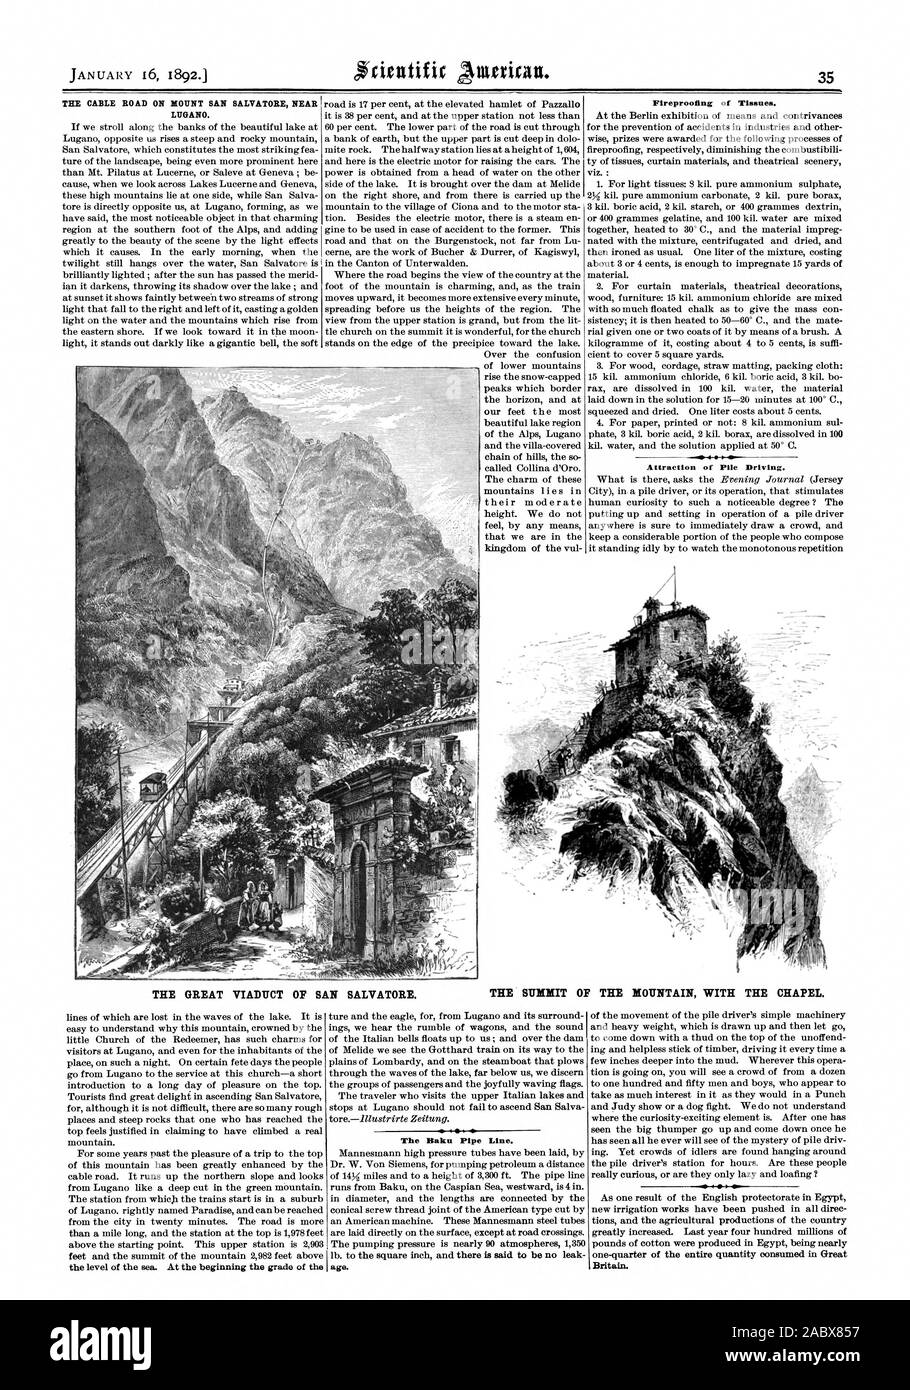 THE CABLE ROAD ON MOUNT SAN SALVATORE NEAR LUGANO. Fireproofing of Tissues. Attraction of Pile Driving. THE GREAT VIADUCT OF SAN SALVATORE. THE SUMMIT OF THE MOUNTAIN WITH THE CHAPEL. The Baku Pipe Line. age. Britain., scientific american, 1892-01-16 Stock Photo